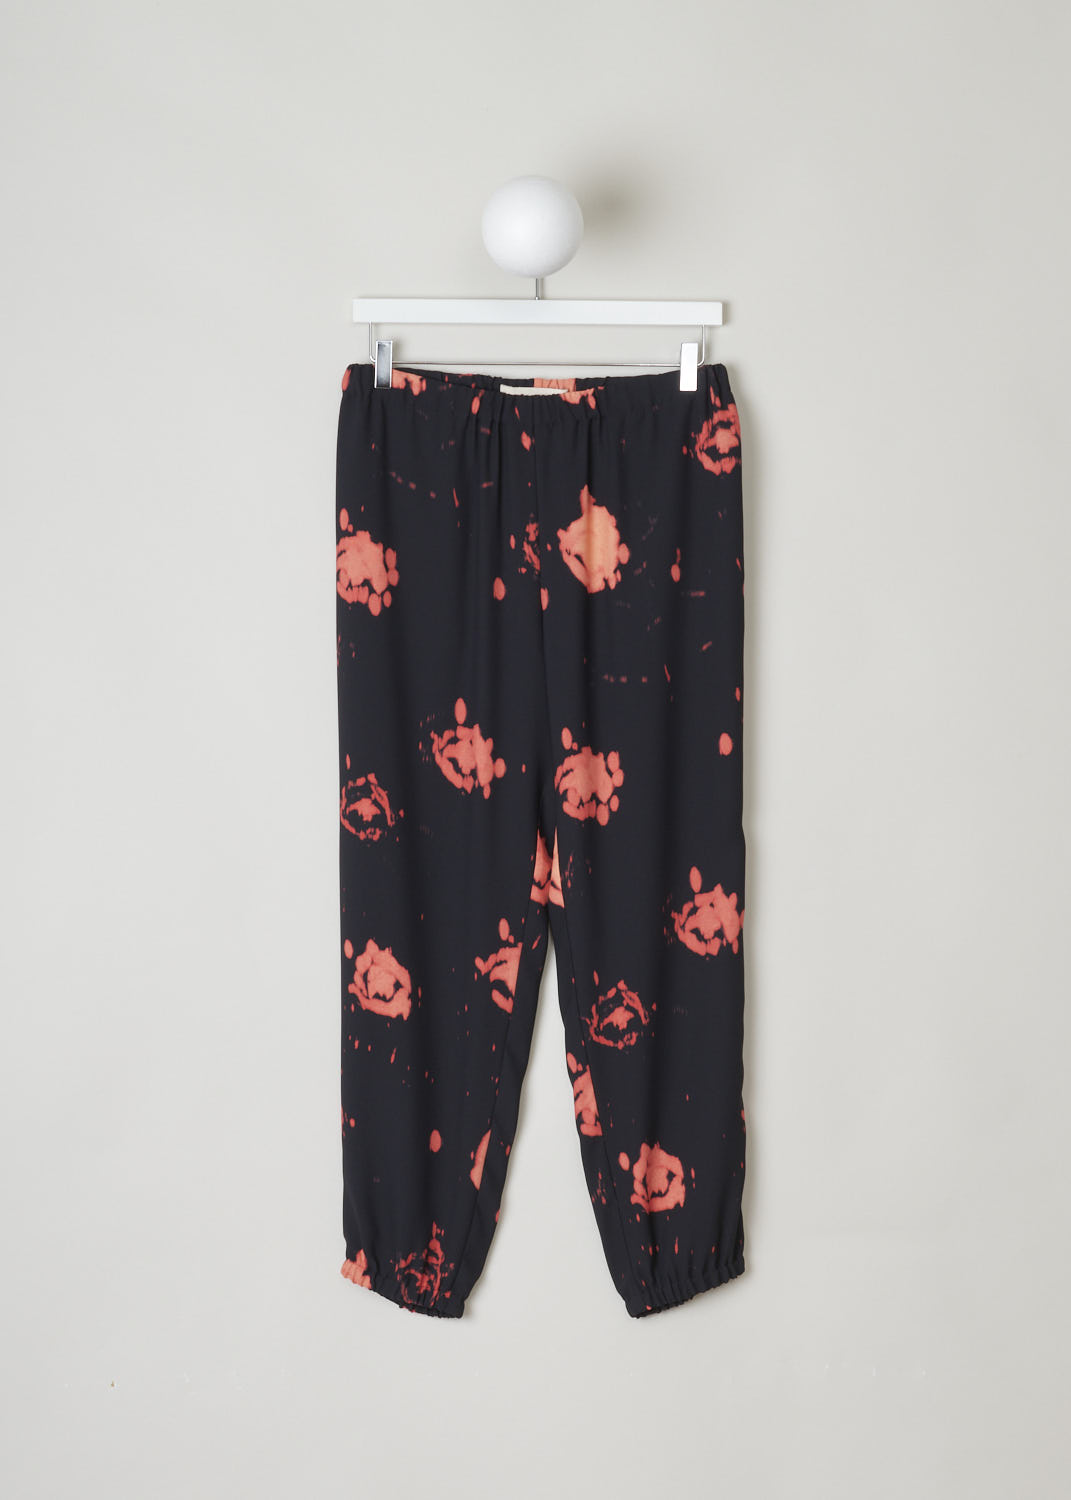 MARNI, BLACK JOGGERS WITH ABSTRACT PRINT, PAMA0291A1_UTV858_FRN99, Black, Print, Front, Beautiful black joggers with an abstract print throughout. These comfortable pants have an elasticated waistband and a drawstring as well as elasticated cuffed hems. Two slanted pockets can be found on either side. 